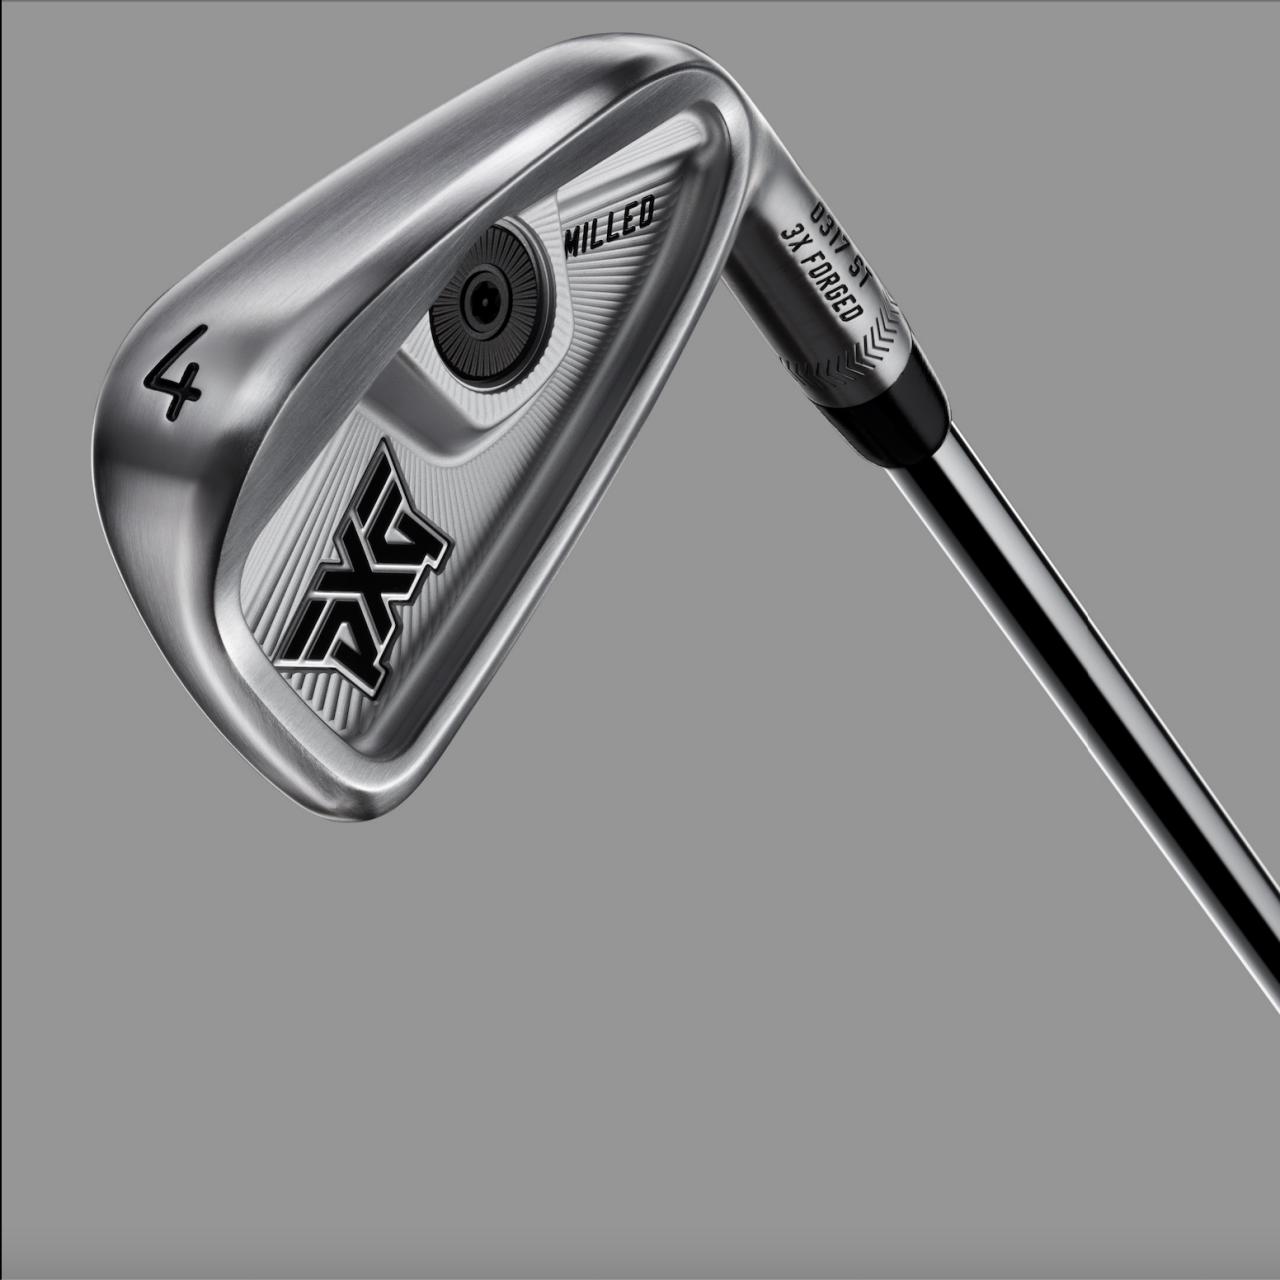 PXG 0317 ST Blades: What you need to know | Golf Equipment 